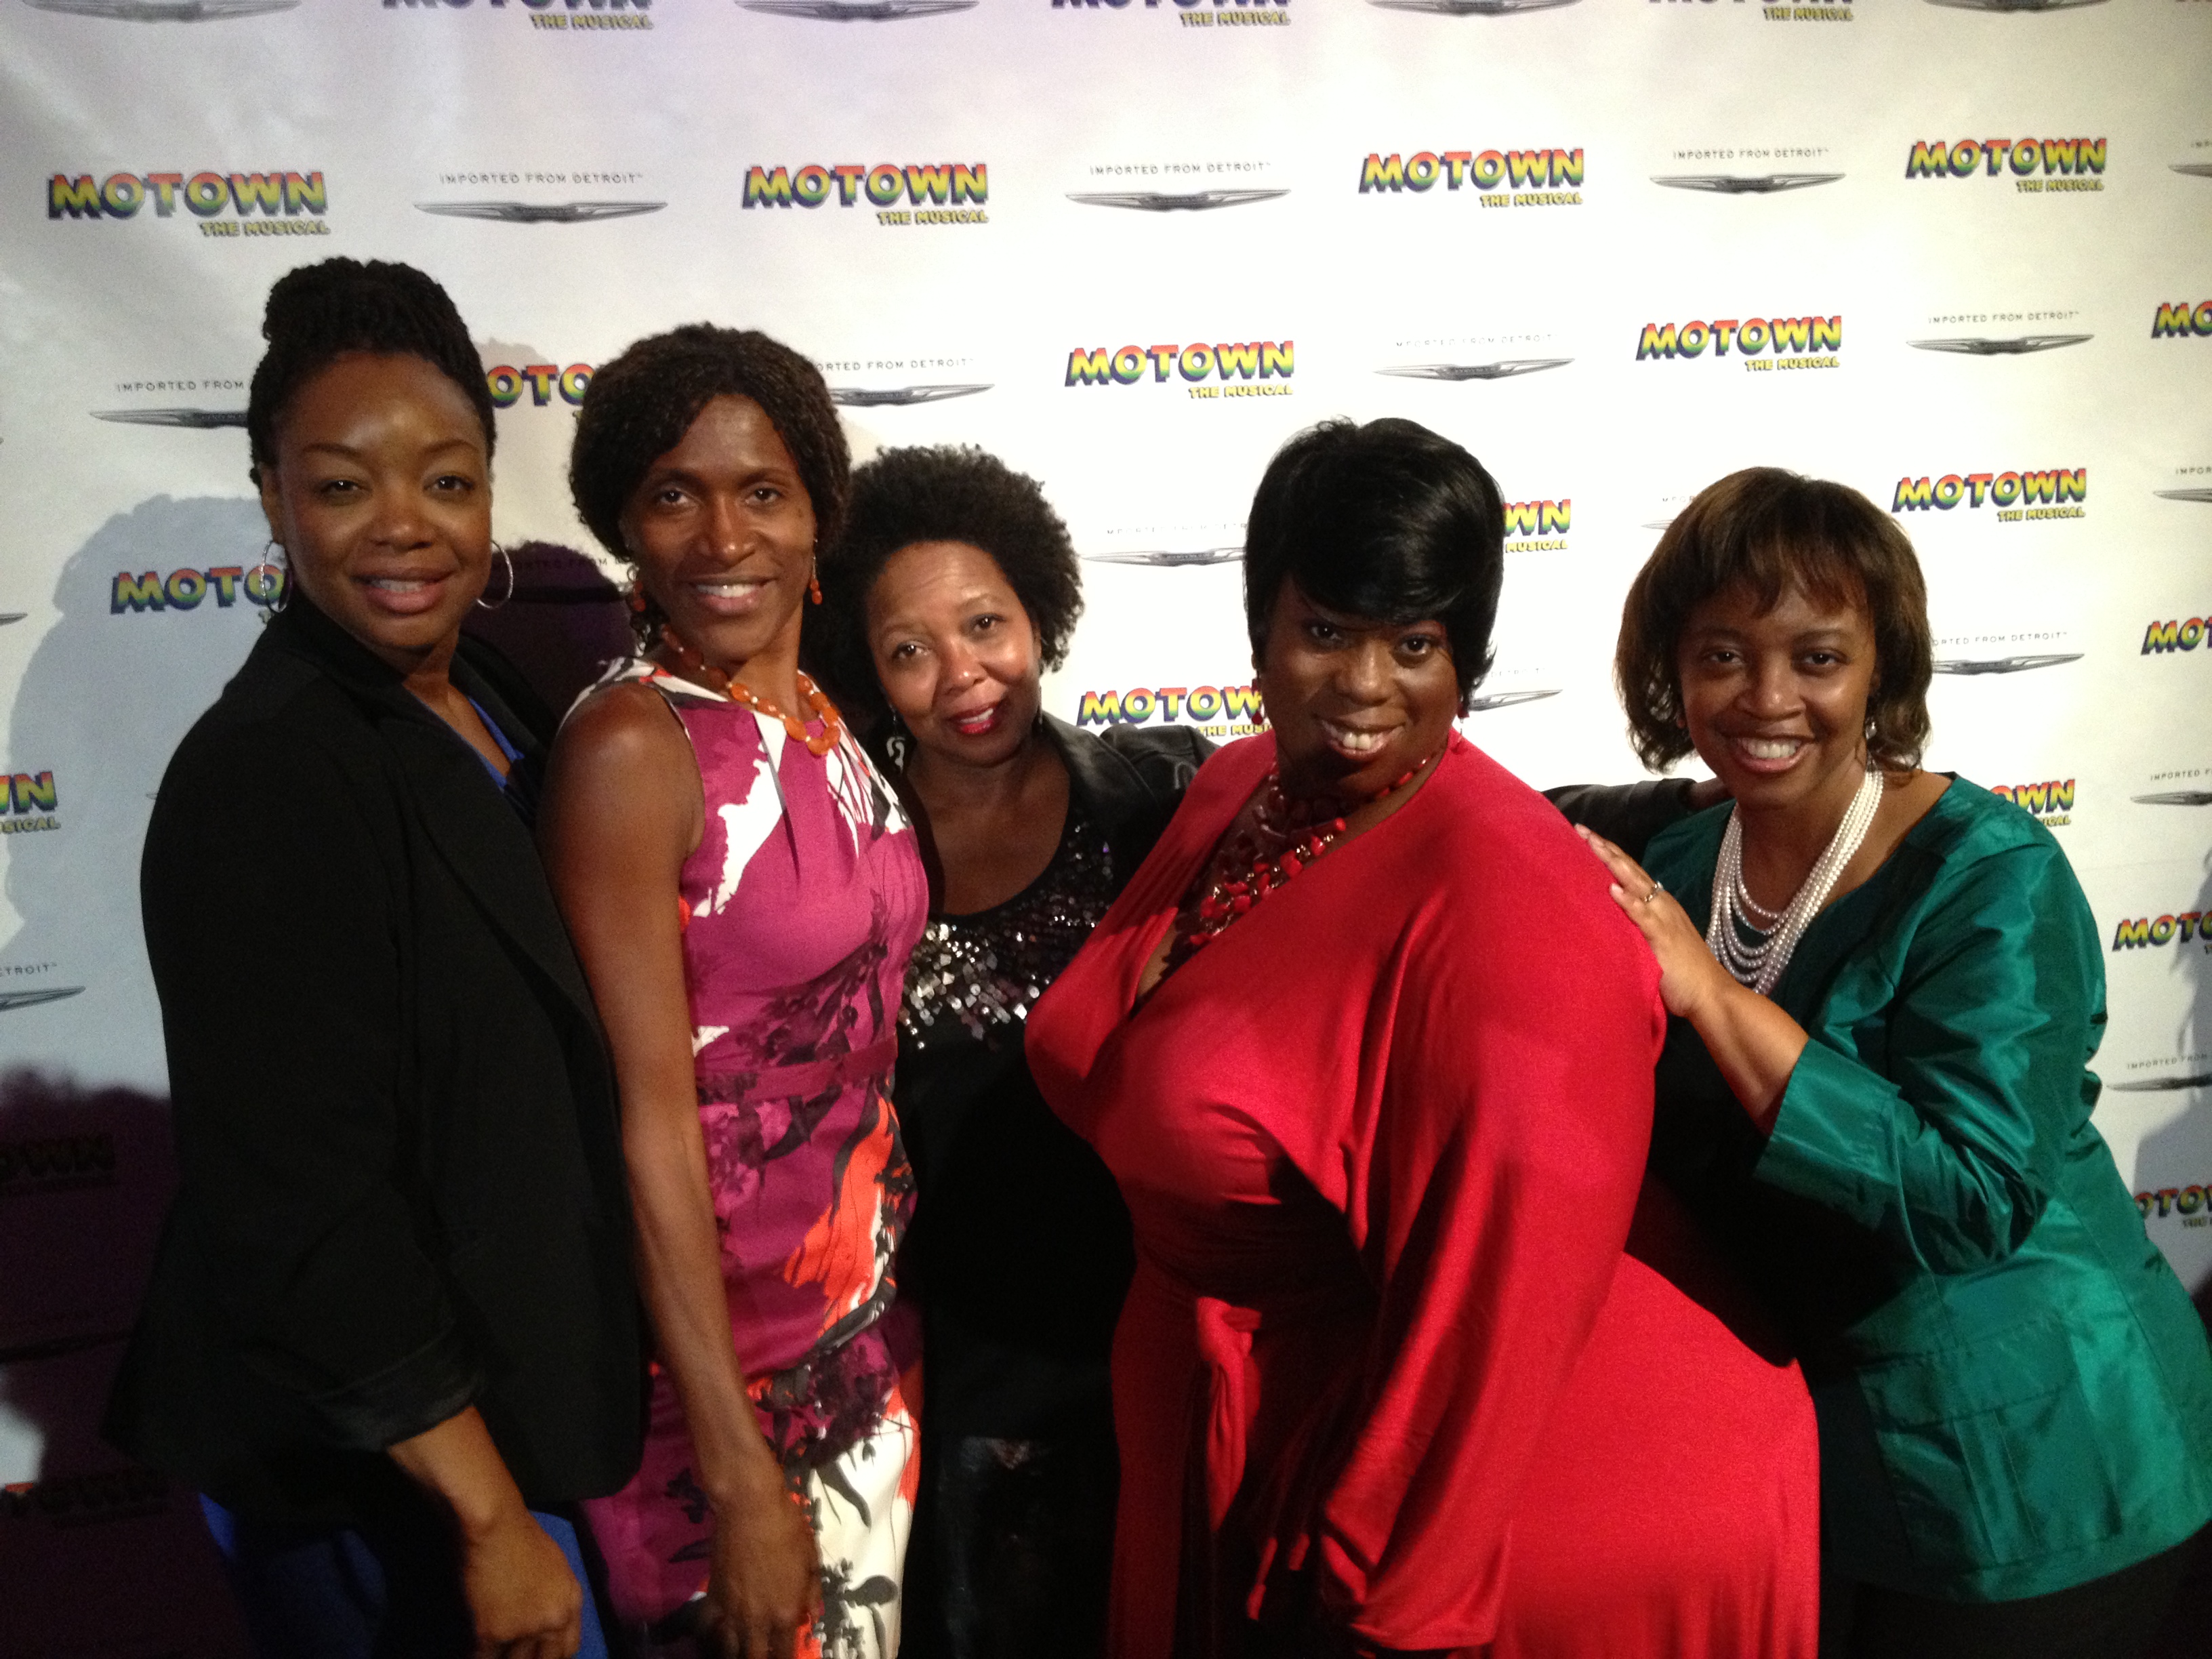 Me and the Girls for the Opening Preview Party for Motown on Broadway